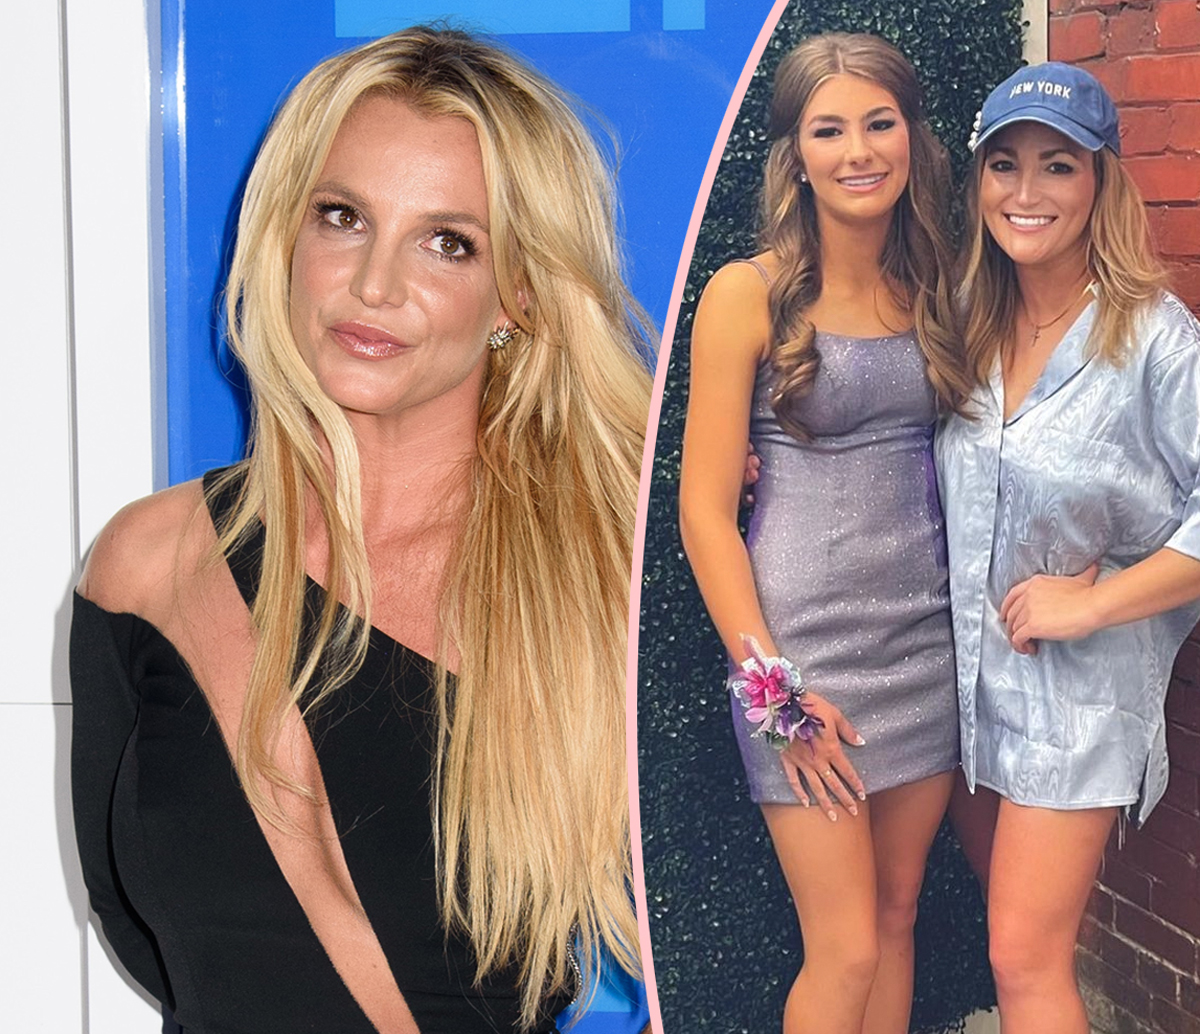 #Britney Spears Thought She Was Being Told Niece Maddie DIED In That ATV Accident: ‘I Lost My Mind’